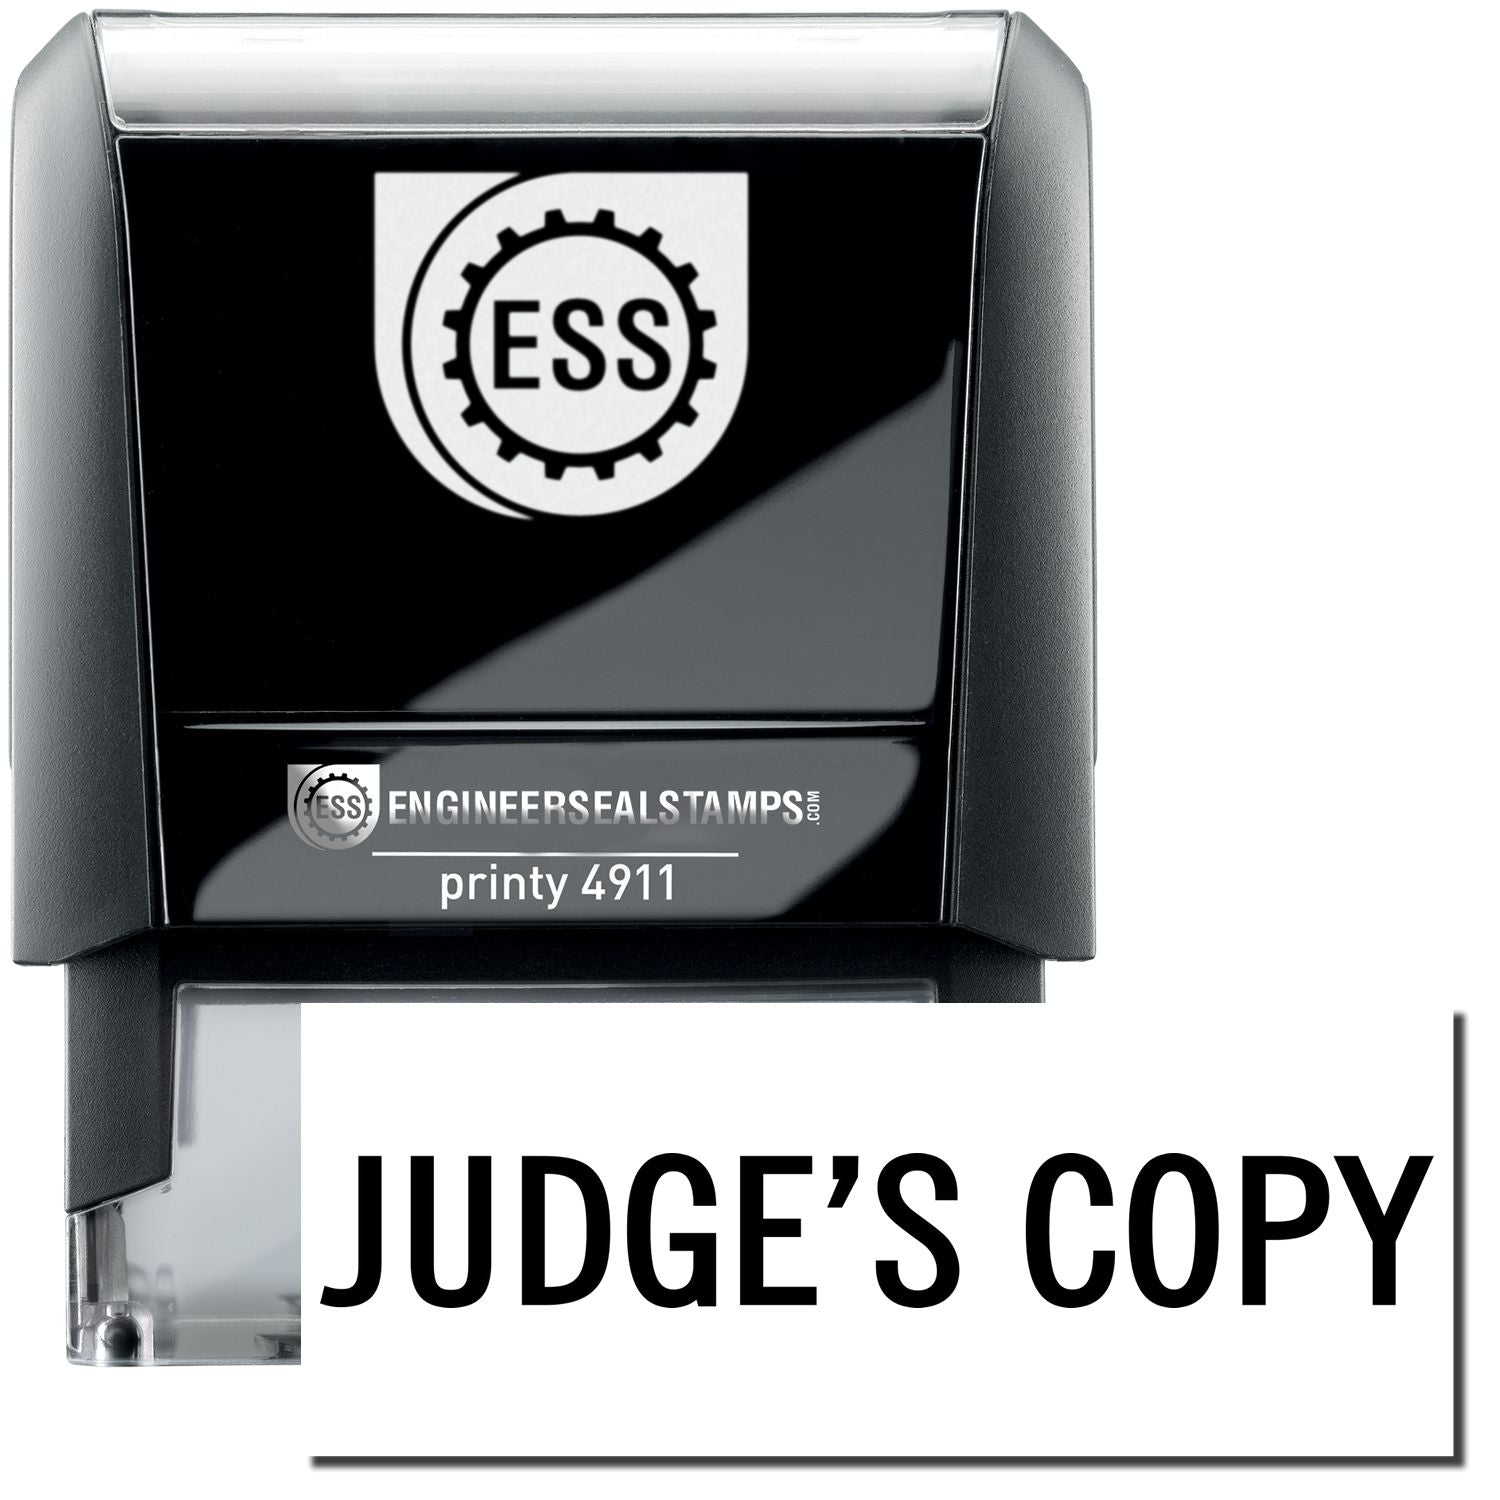 A self-inking stamp with a stamped image showing how the text "JUDGE'S COPY" is displayed after stamping.